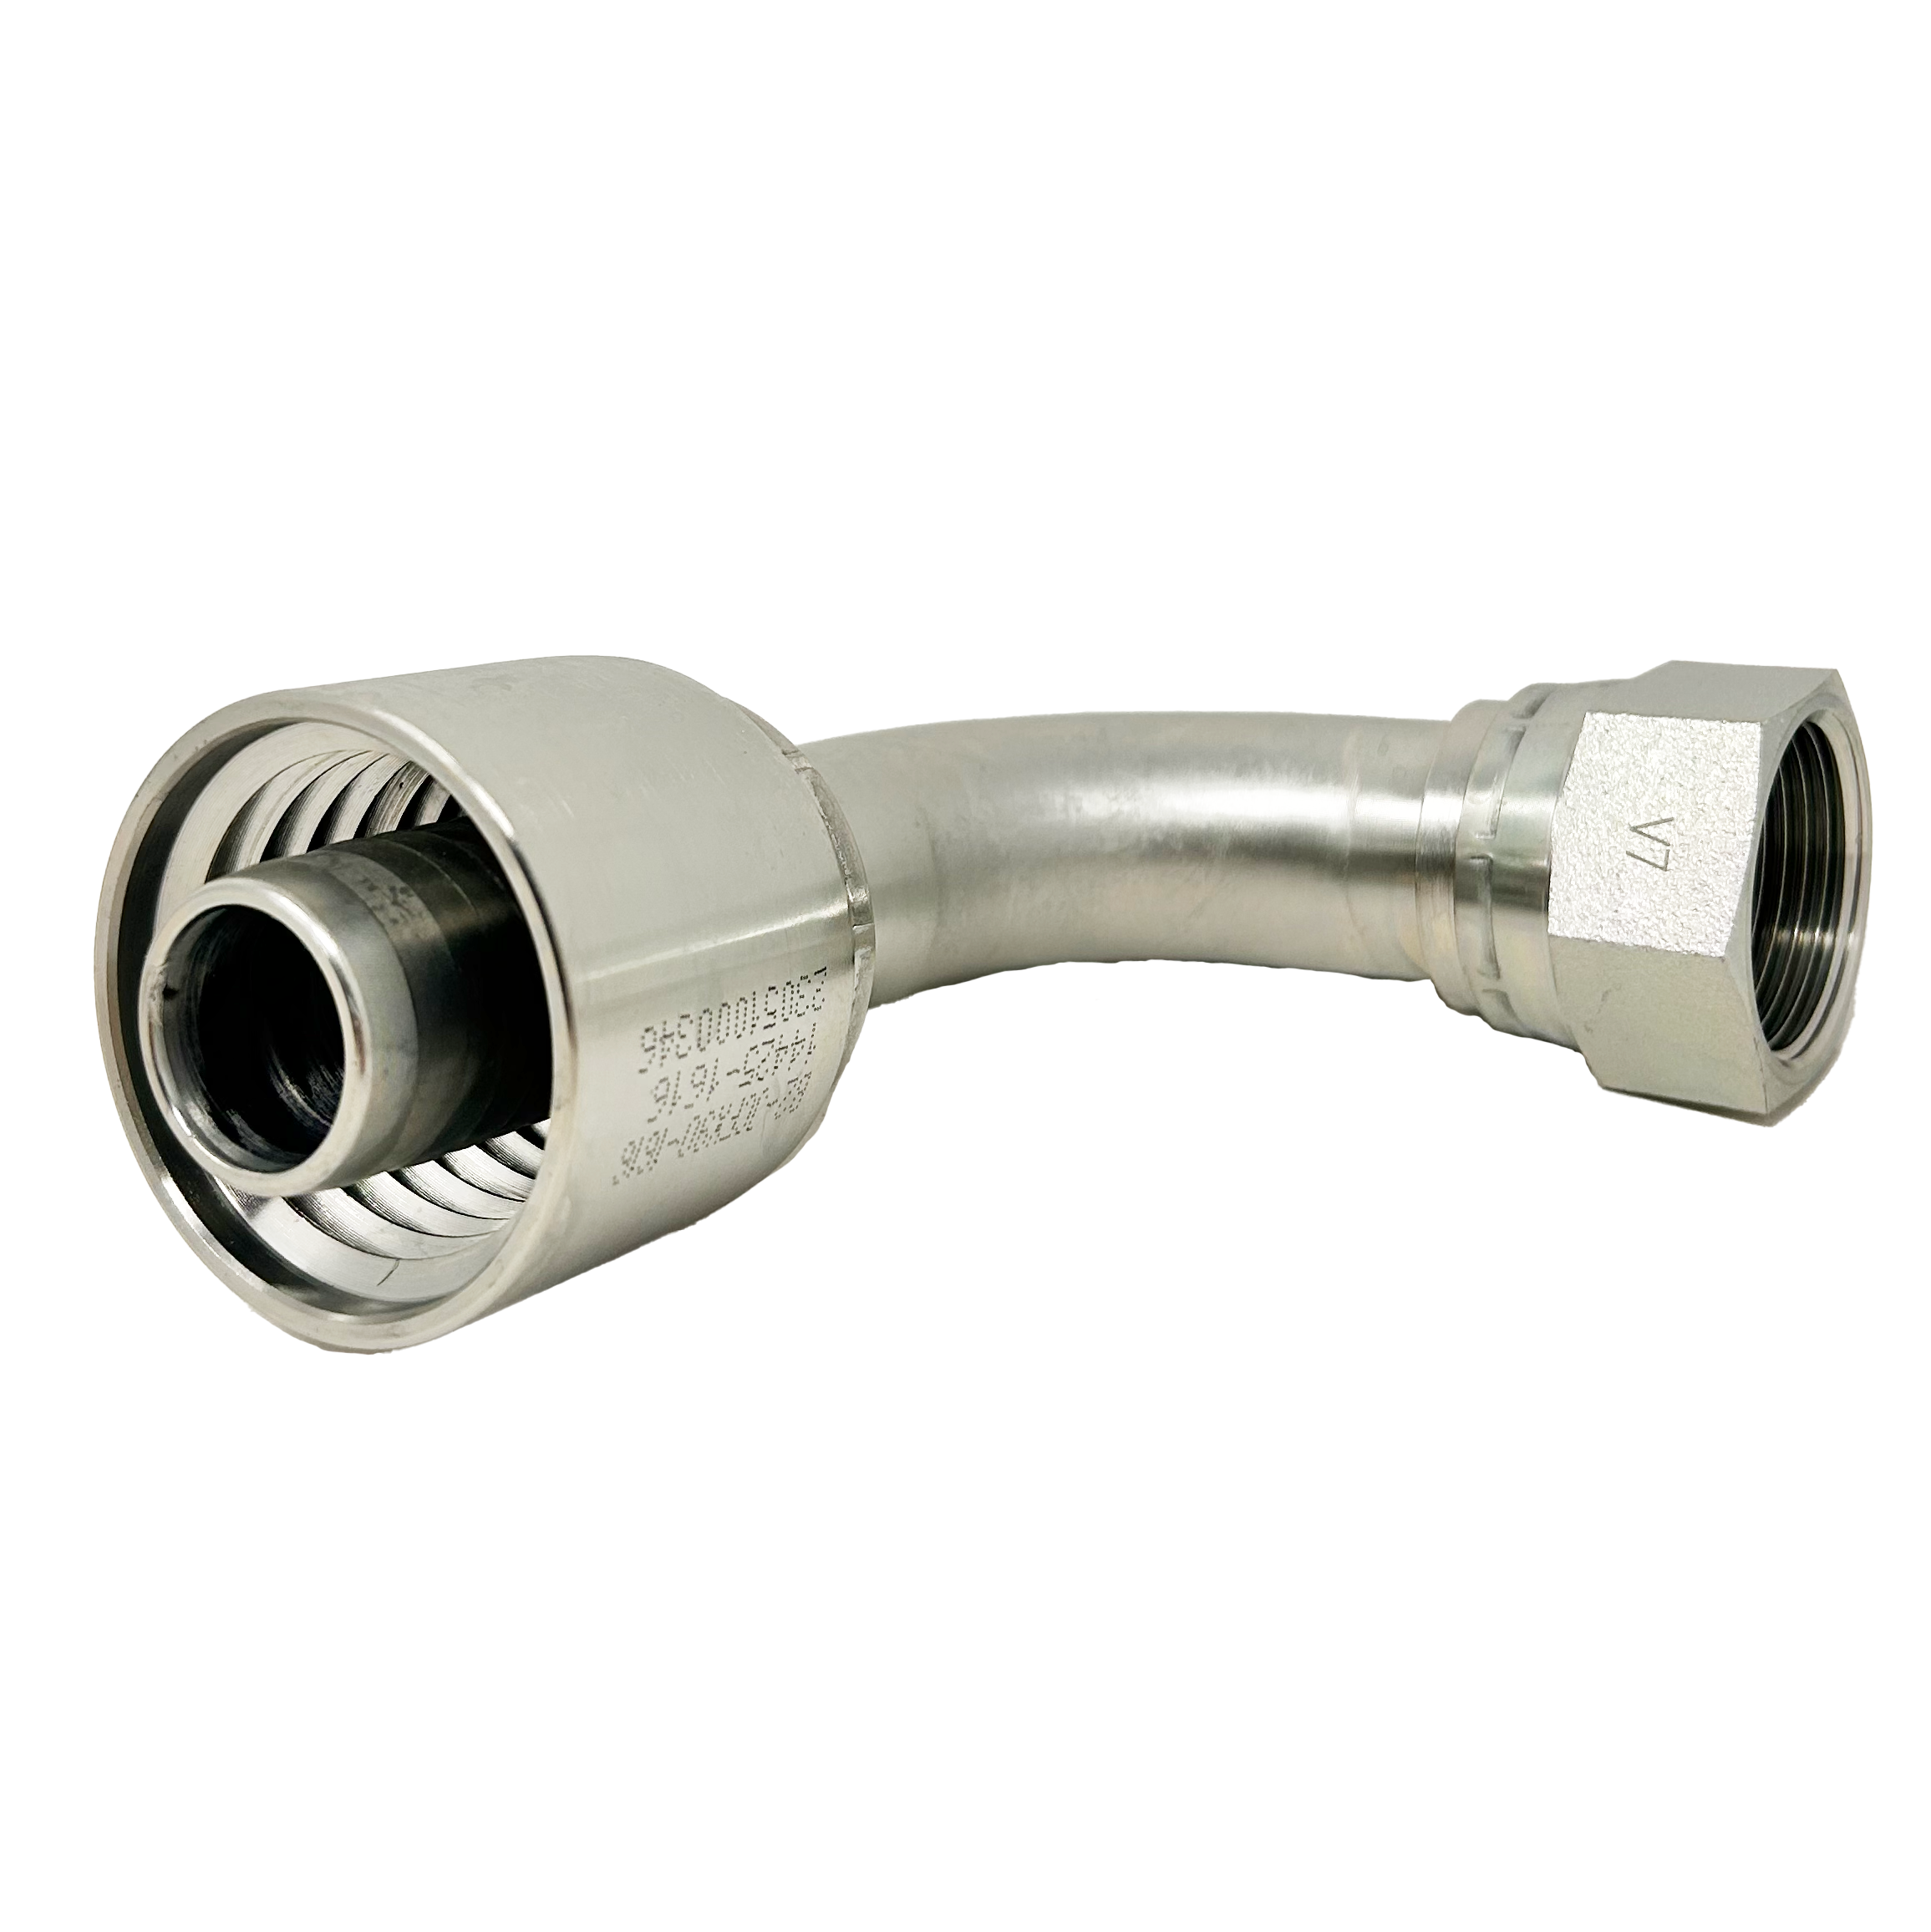 B2-JCFX90-3232: Continental Hose Fitting, 2" Hose ID x 2-1/2-12 Female JIC, 90-Degree Swivel Connection